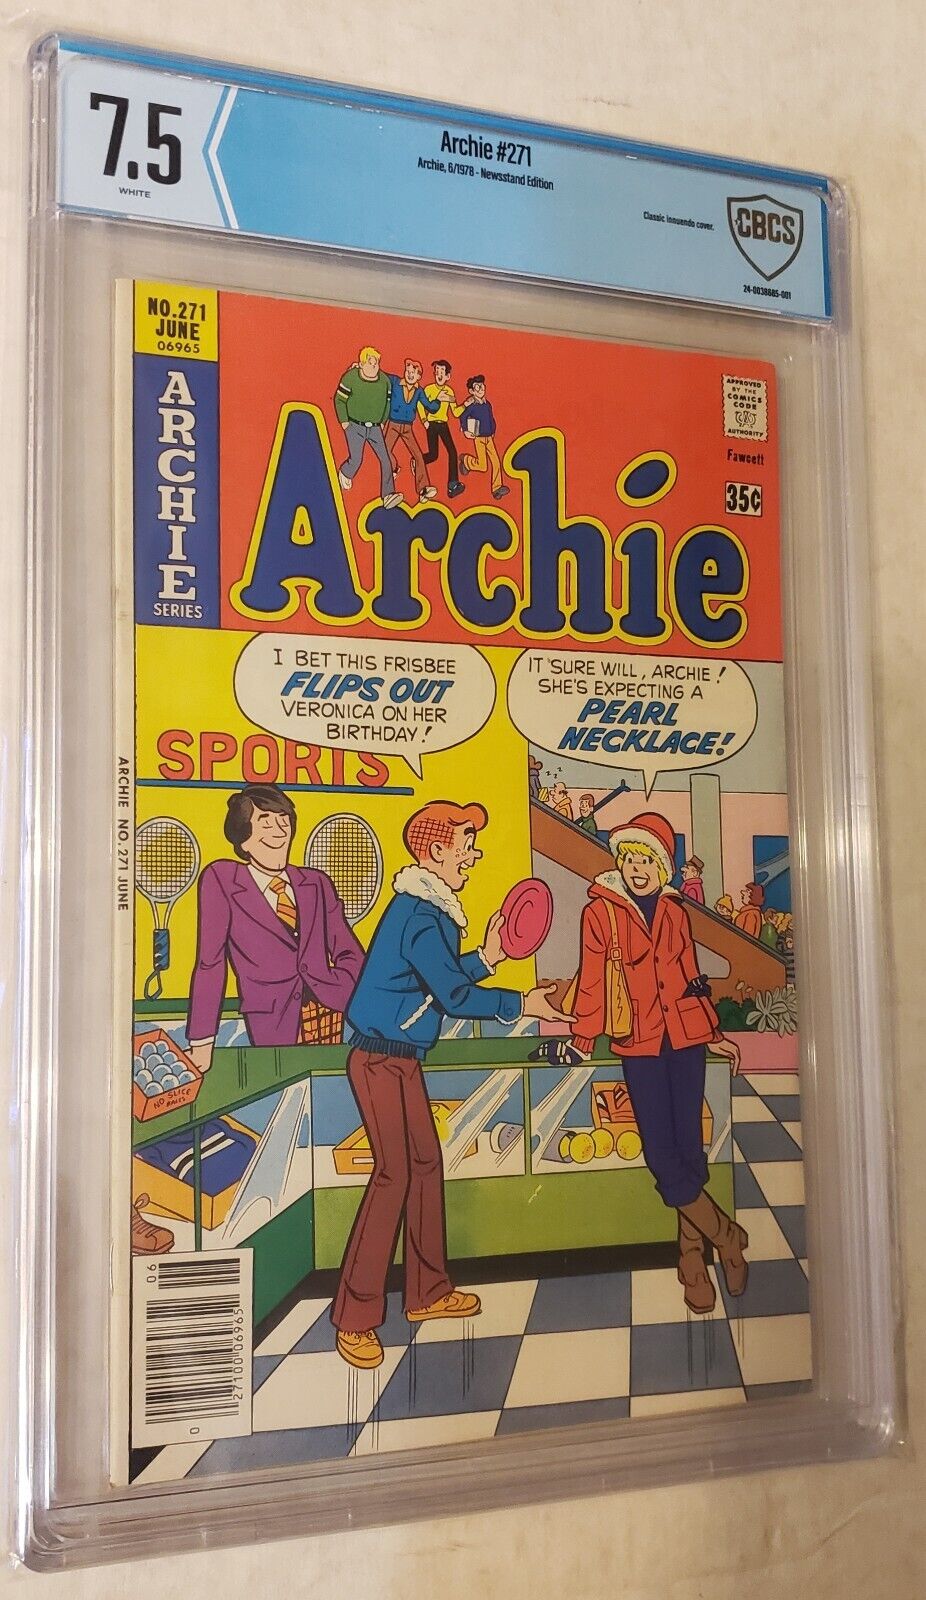 Archie Comics #271 Pearl Necklace INNUENDO cover CBCS 7.5 VF not CGC HIGH GRADE